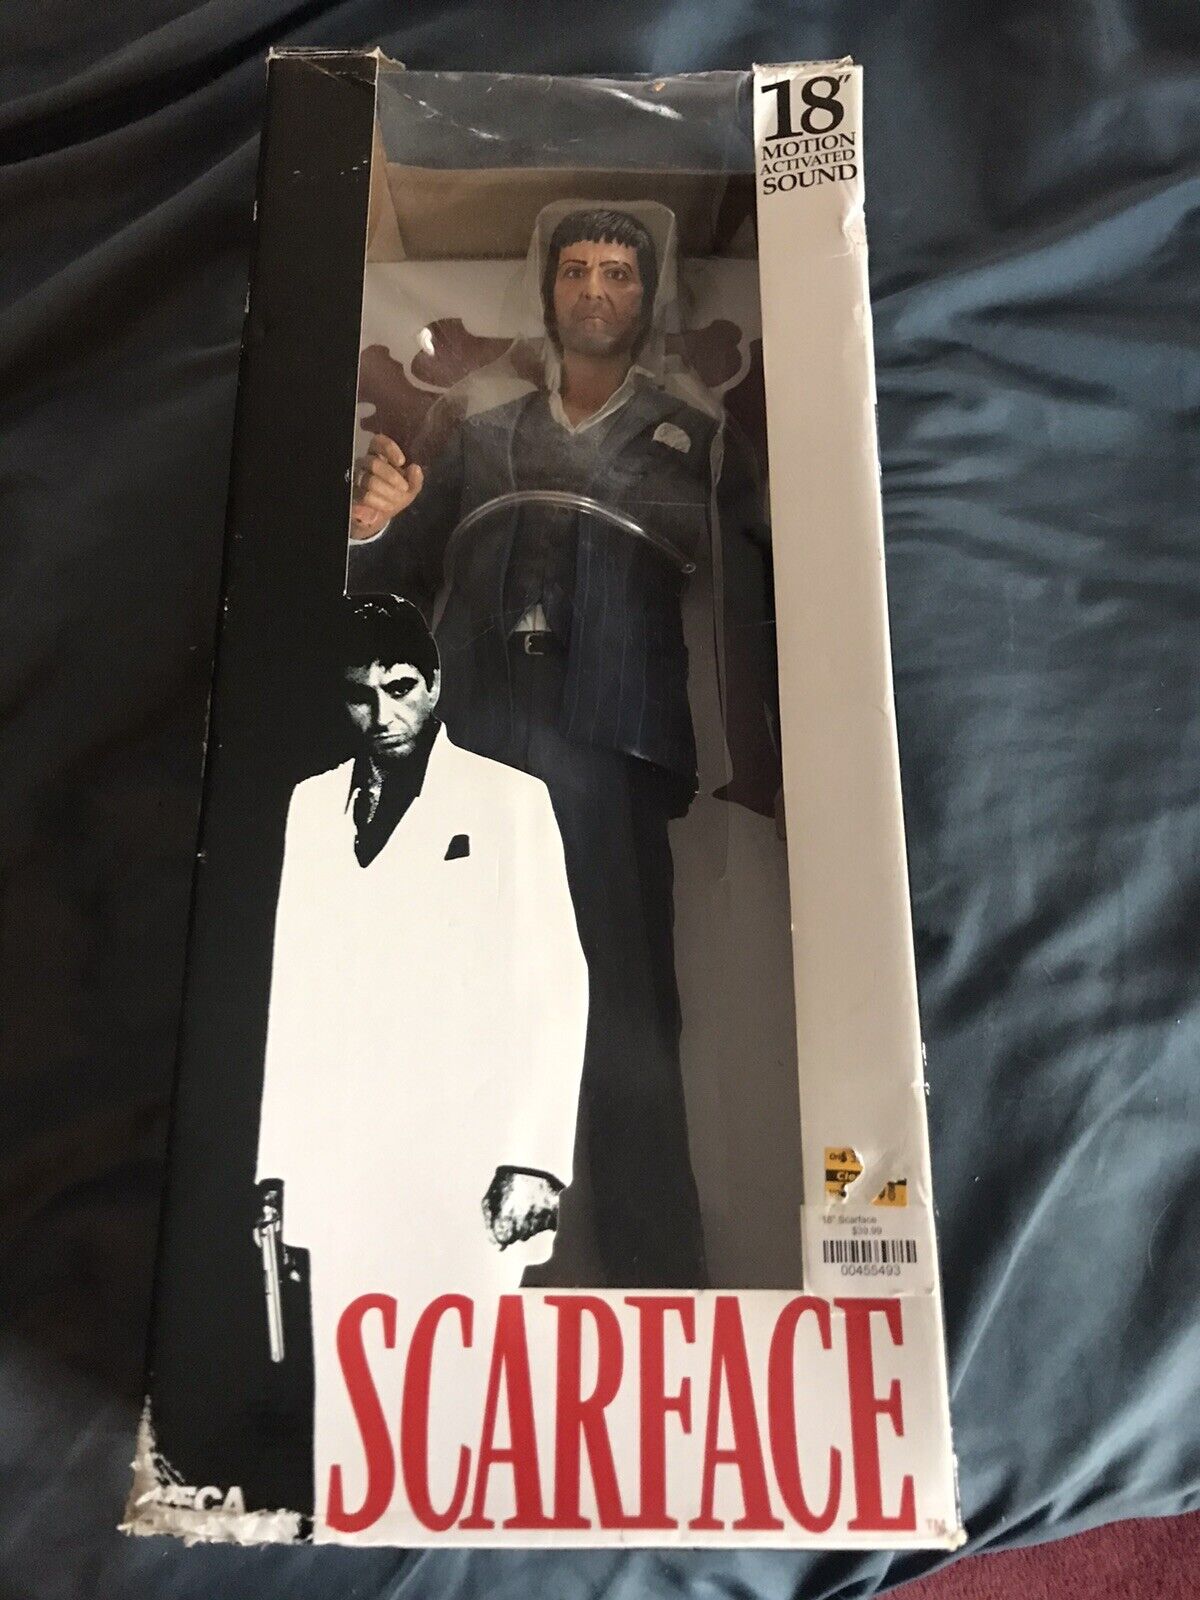 NECA Reel Toys Scarface 18” Deluxe Figure Motion Activated Sound - WORKING Cena, tanio